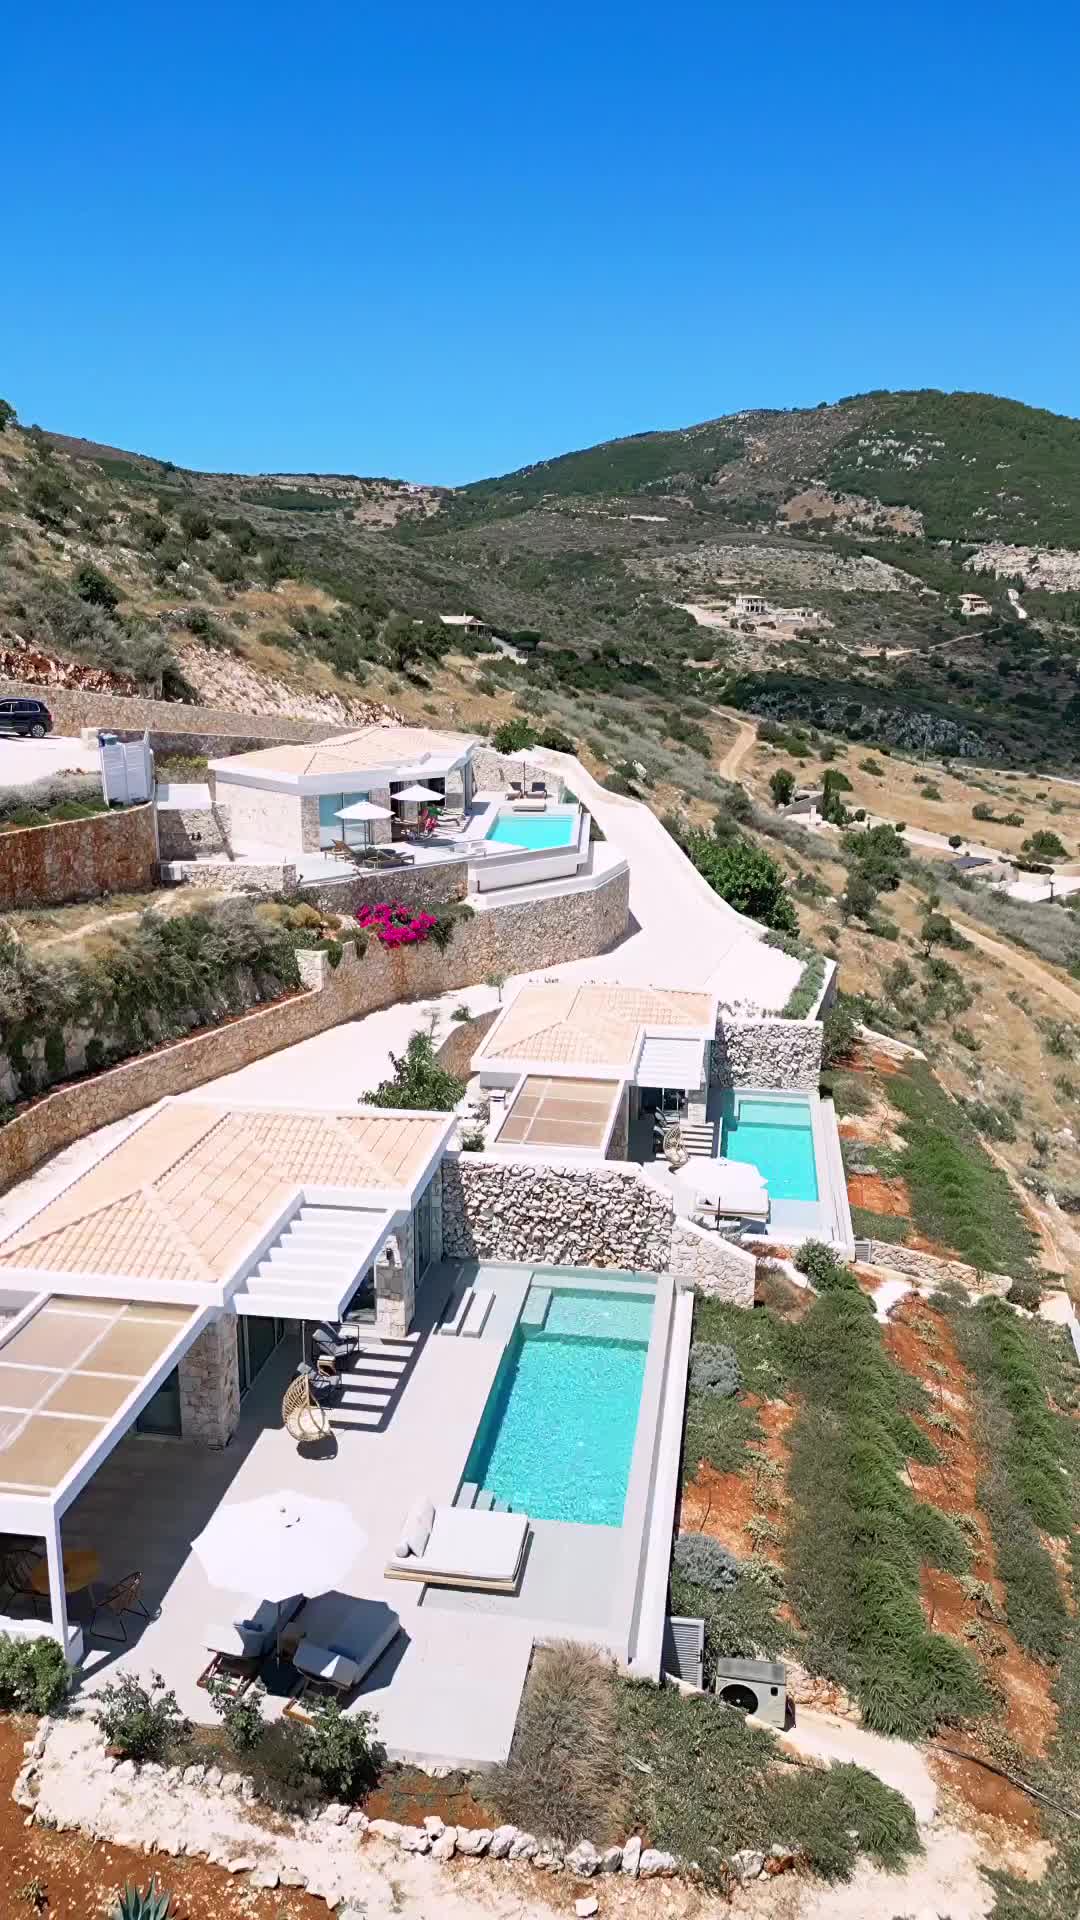 Luxurious Villas in Zakinthos with Private Pools & Views